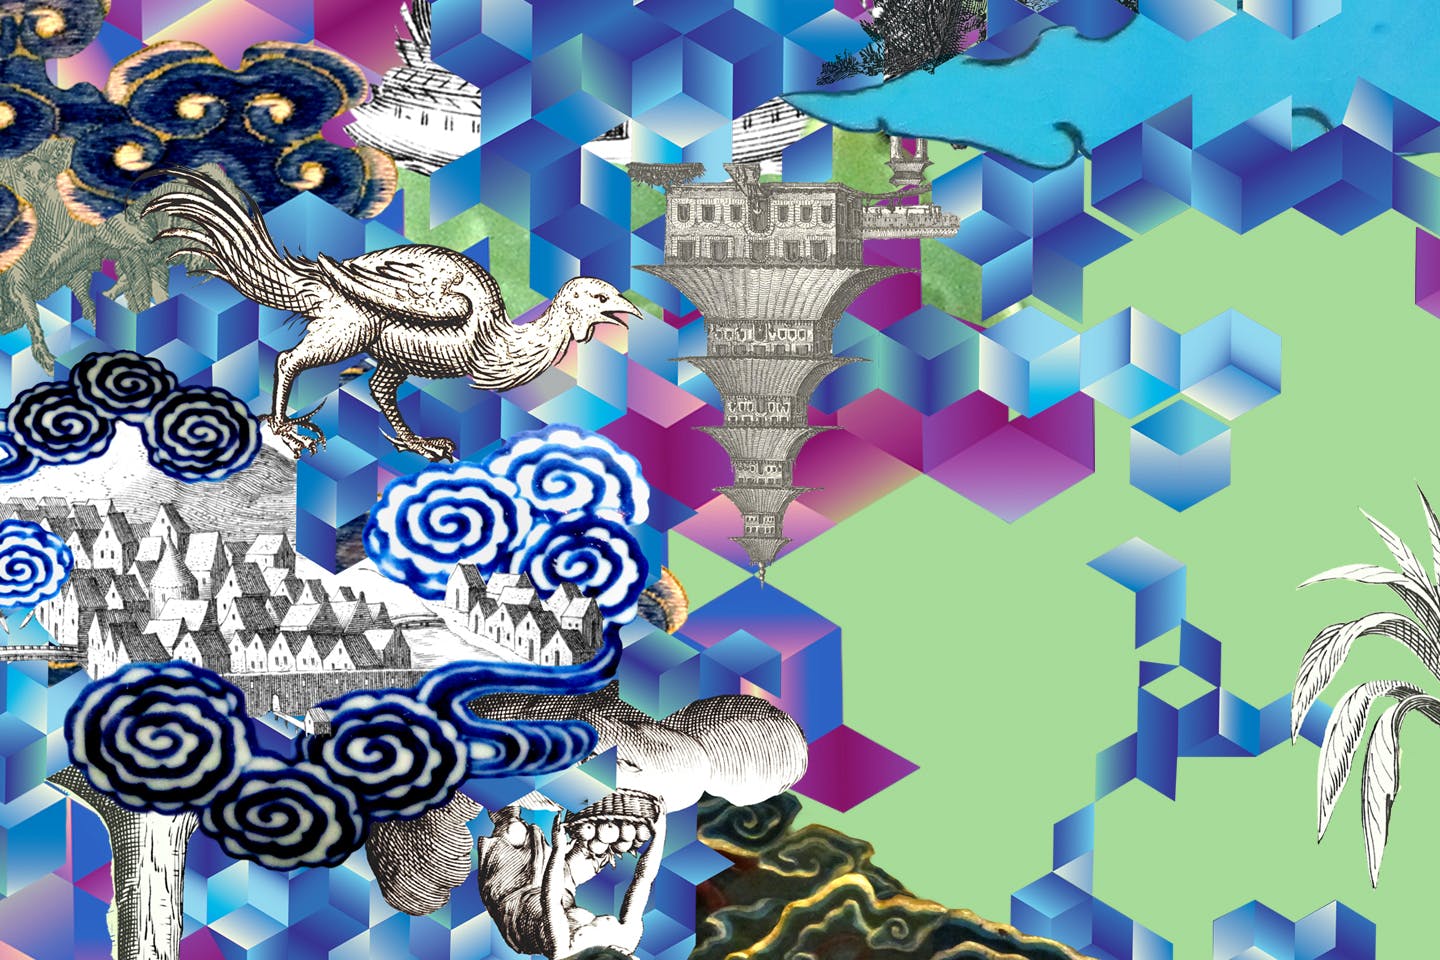 A graphic pattern made up of a purple, blue and green geometric background with various illustrations of buildings, swirling clouds, imaginary birds and plants superimposed on top.